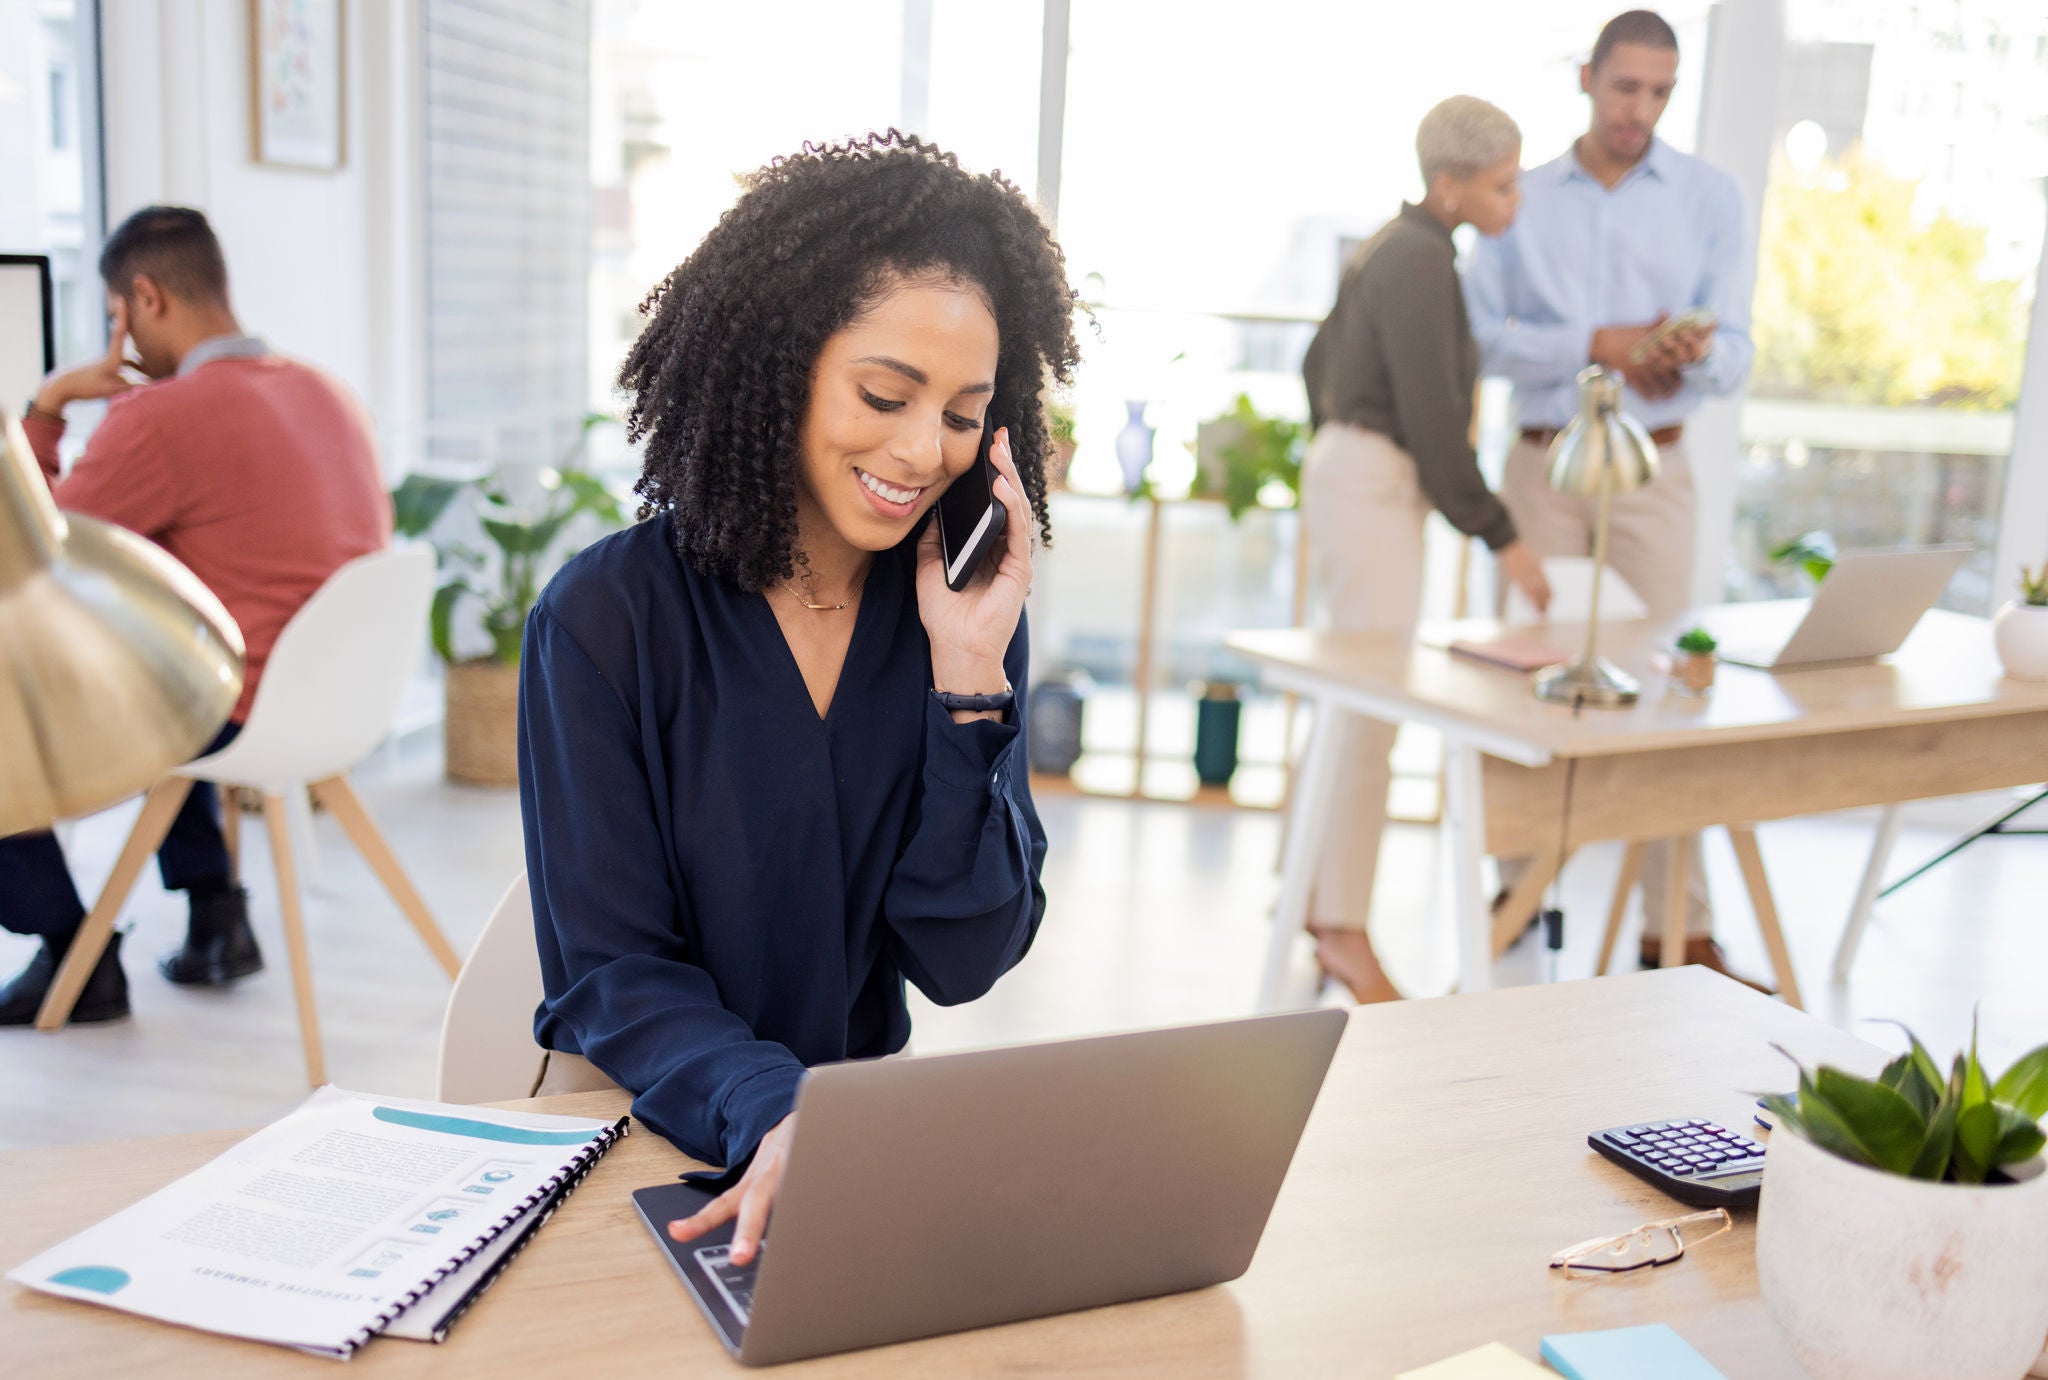 Black woman, phone call and laptop in office for communication, information and marketing. Entrepreneur person at advertising agency while talking to contact for proposal deal or networking at desk.